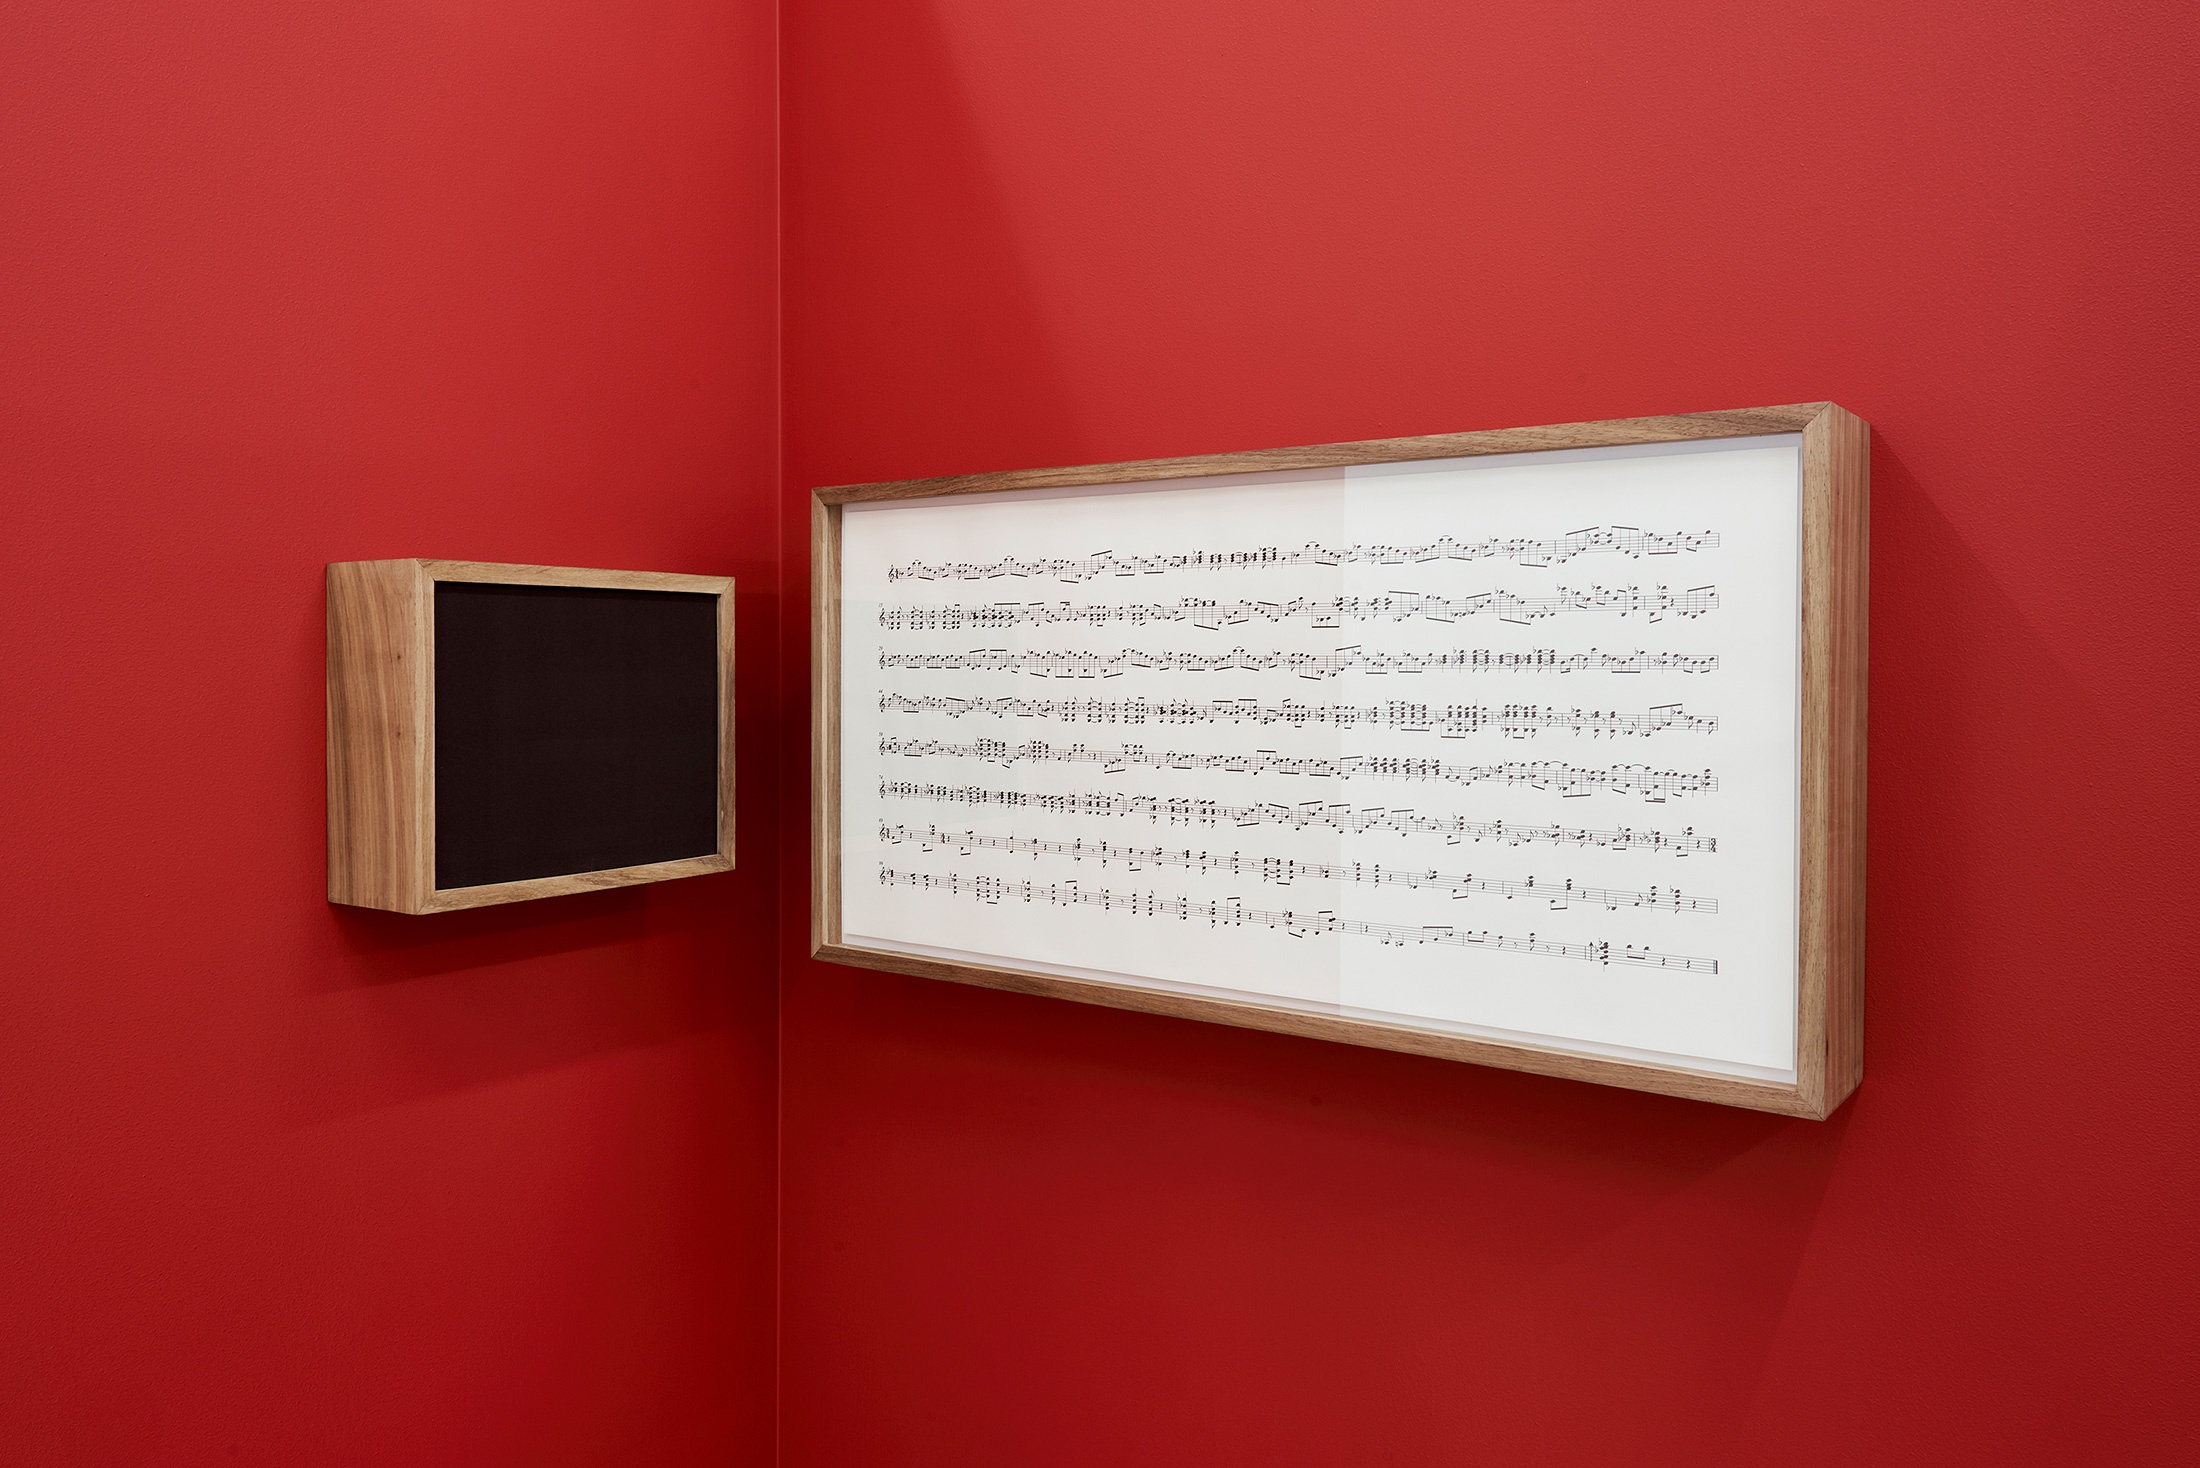 Installation photograph that shows Iñaki Bonillas’ wall-mounted installation ‘The Return to the Origin 6’ in the corner of two red movable gallery walls. On the left is a wood-framed speaker box and on the right, a wood-framed musical score.
